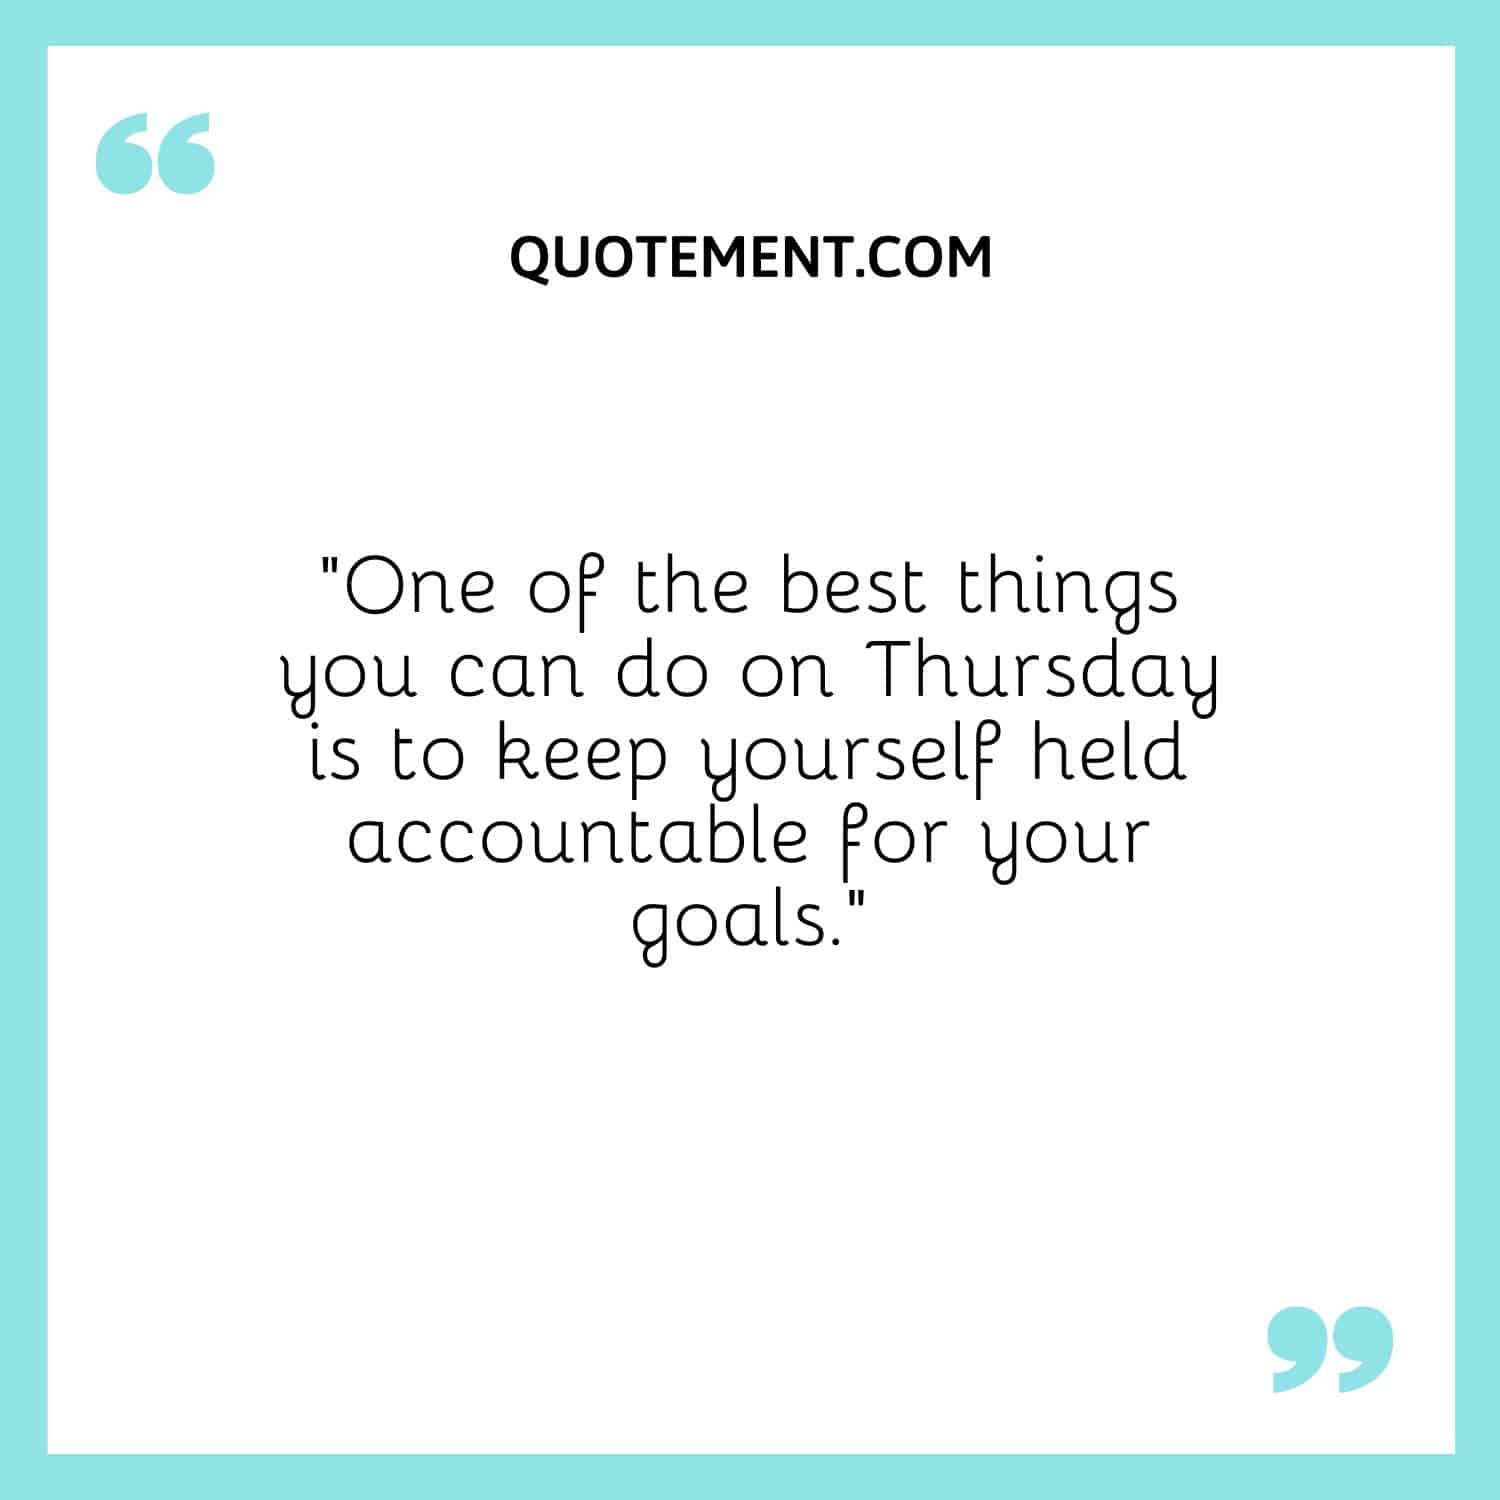 “One of the best things you can do on Thursday is to keep yourself held accountable for your goals.”